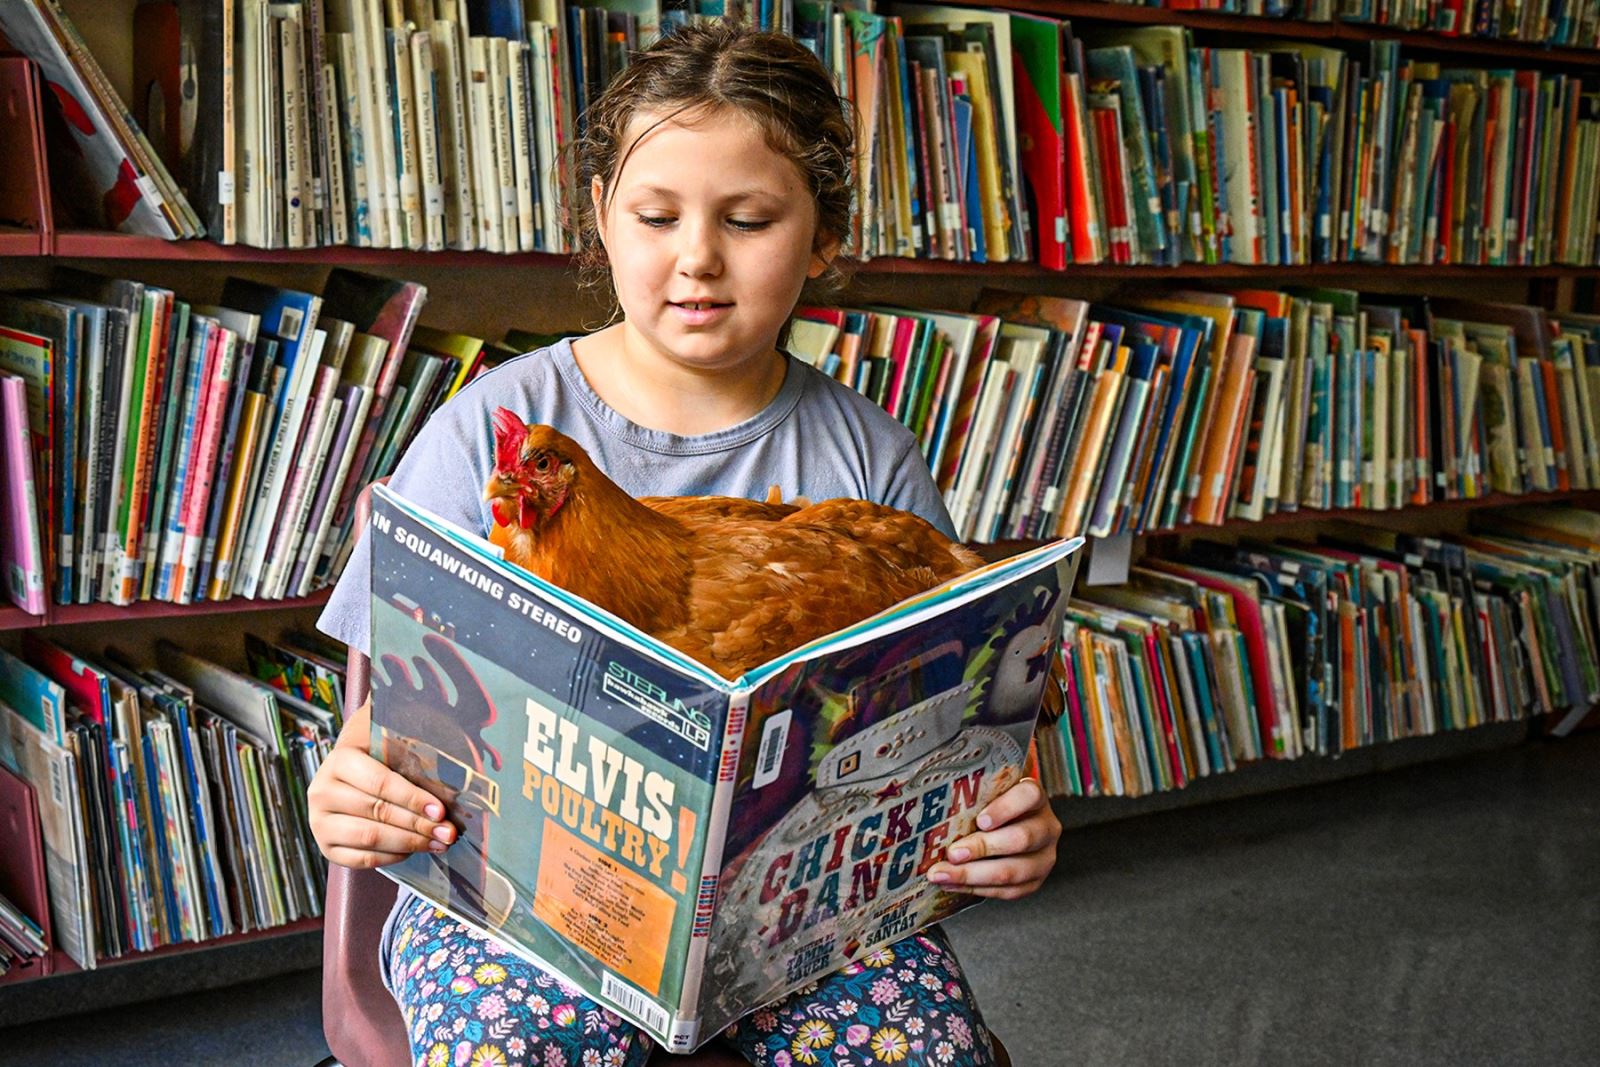 Lucy the chicken enjoys reading books with her classmates.